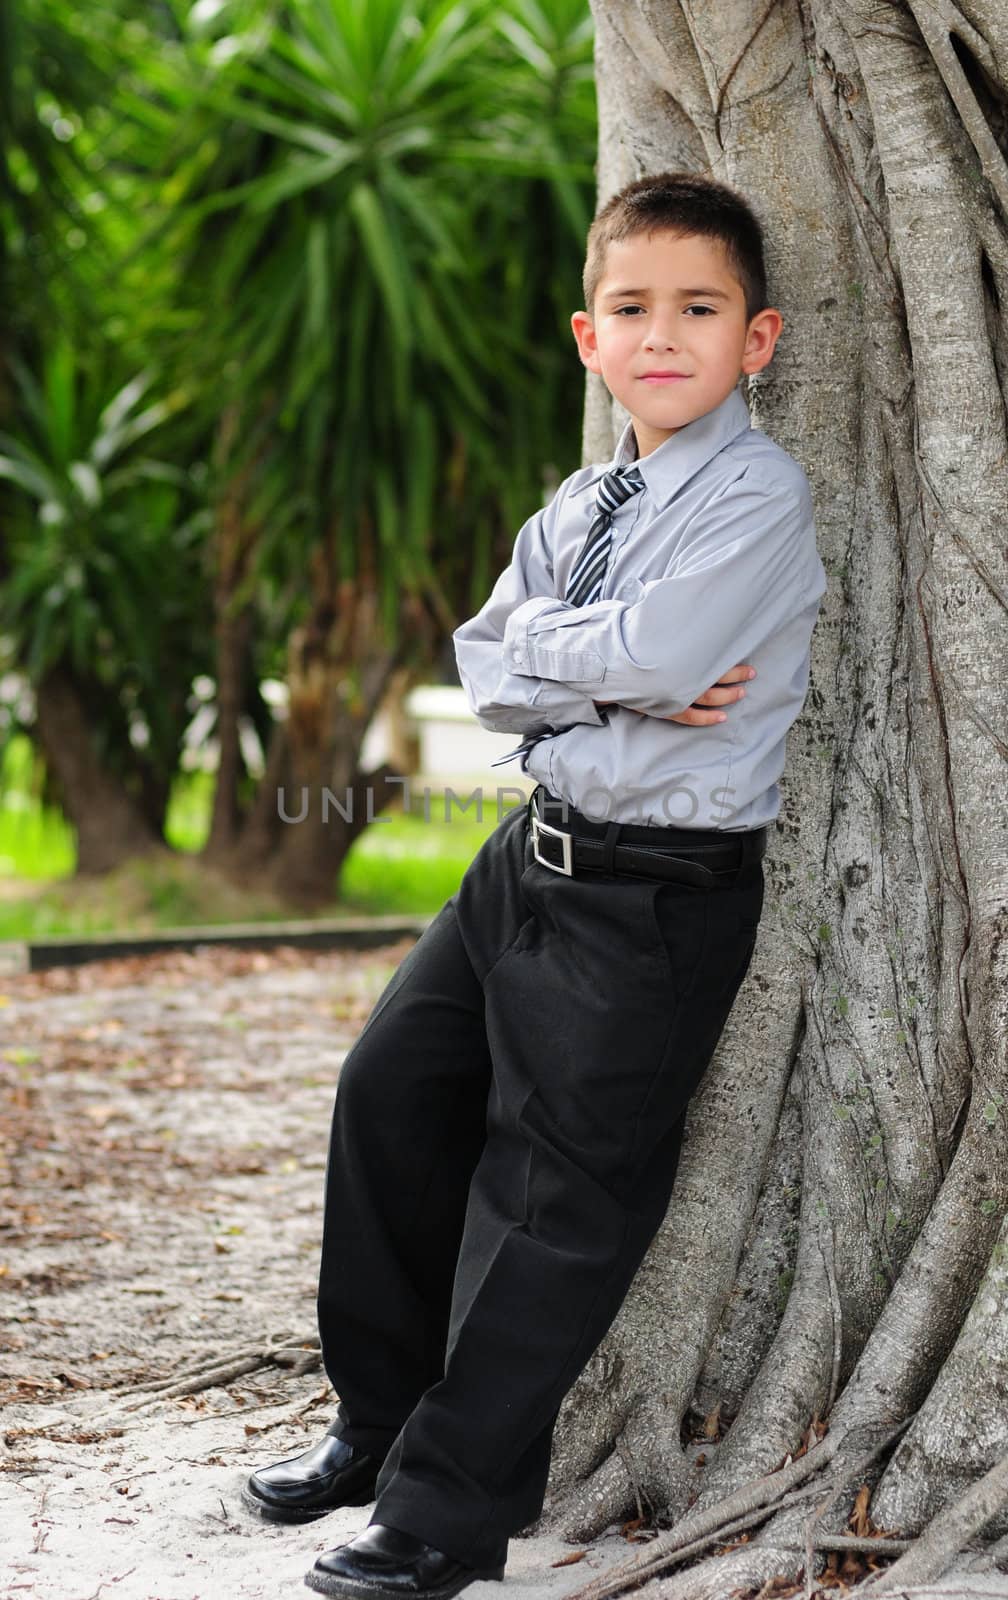 serious Young boy leaning against tree by ftlaudgirl